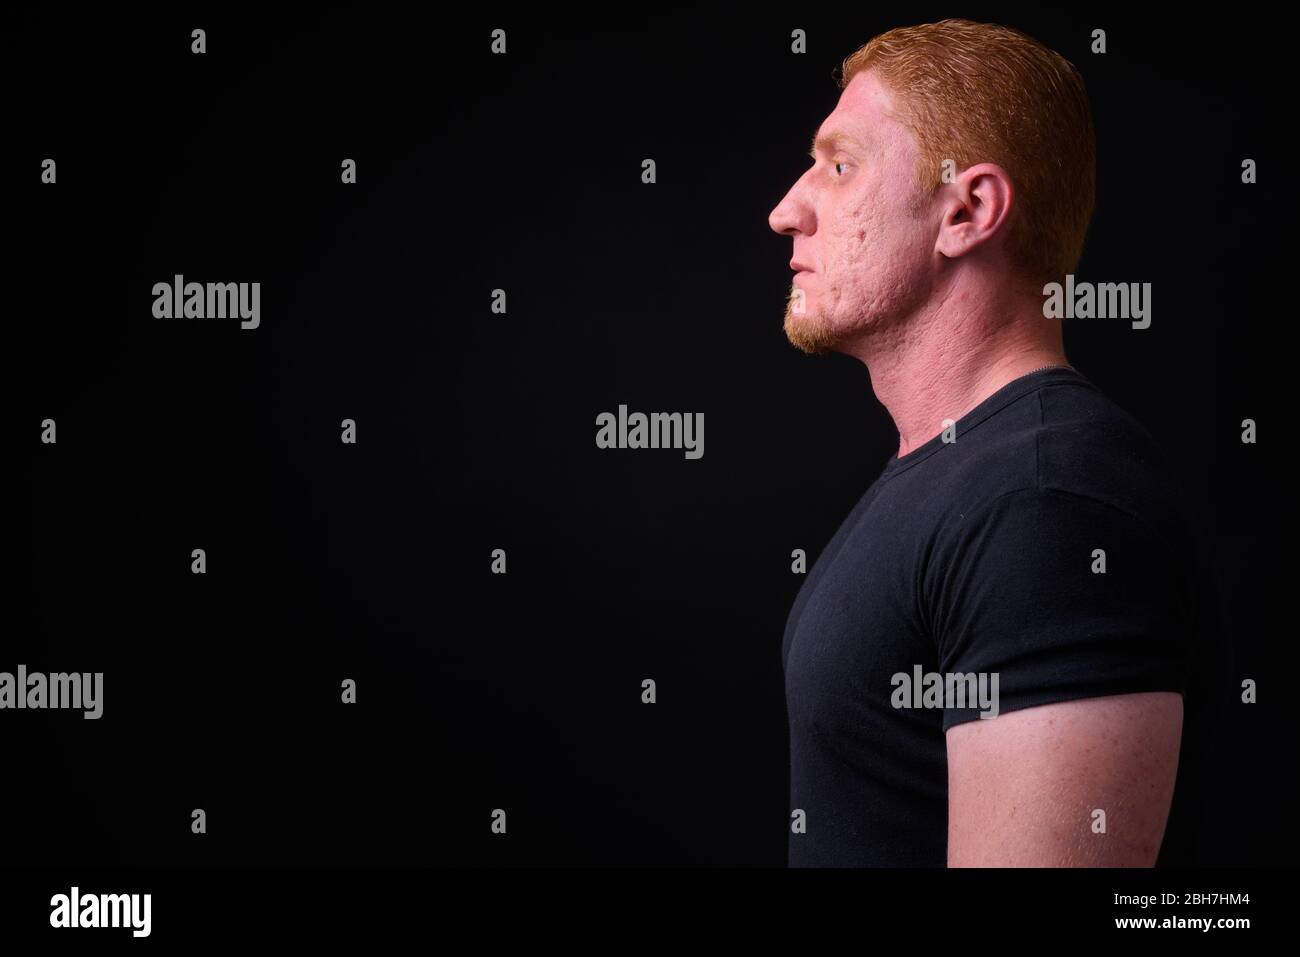 Profile view of muscular man with orange hair Stock Photo